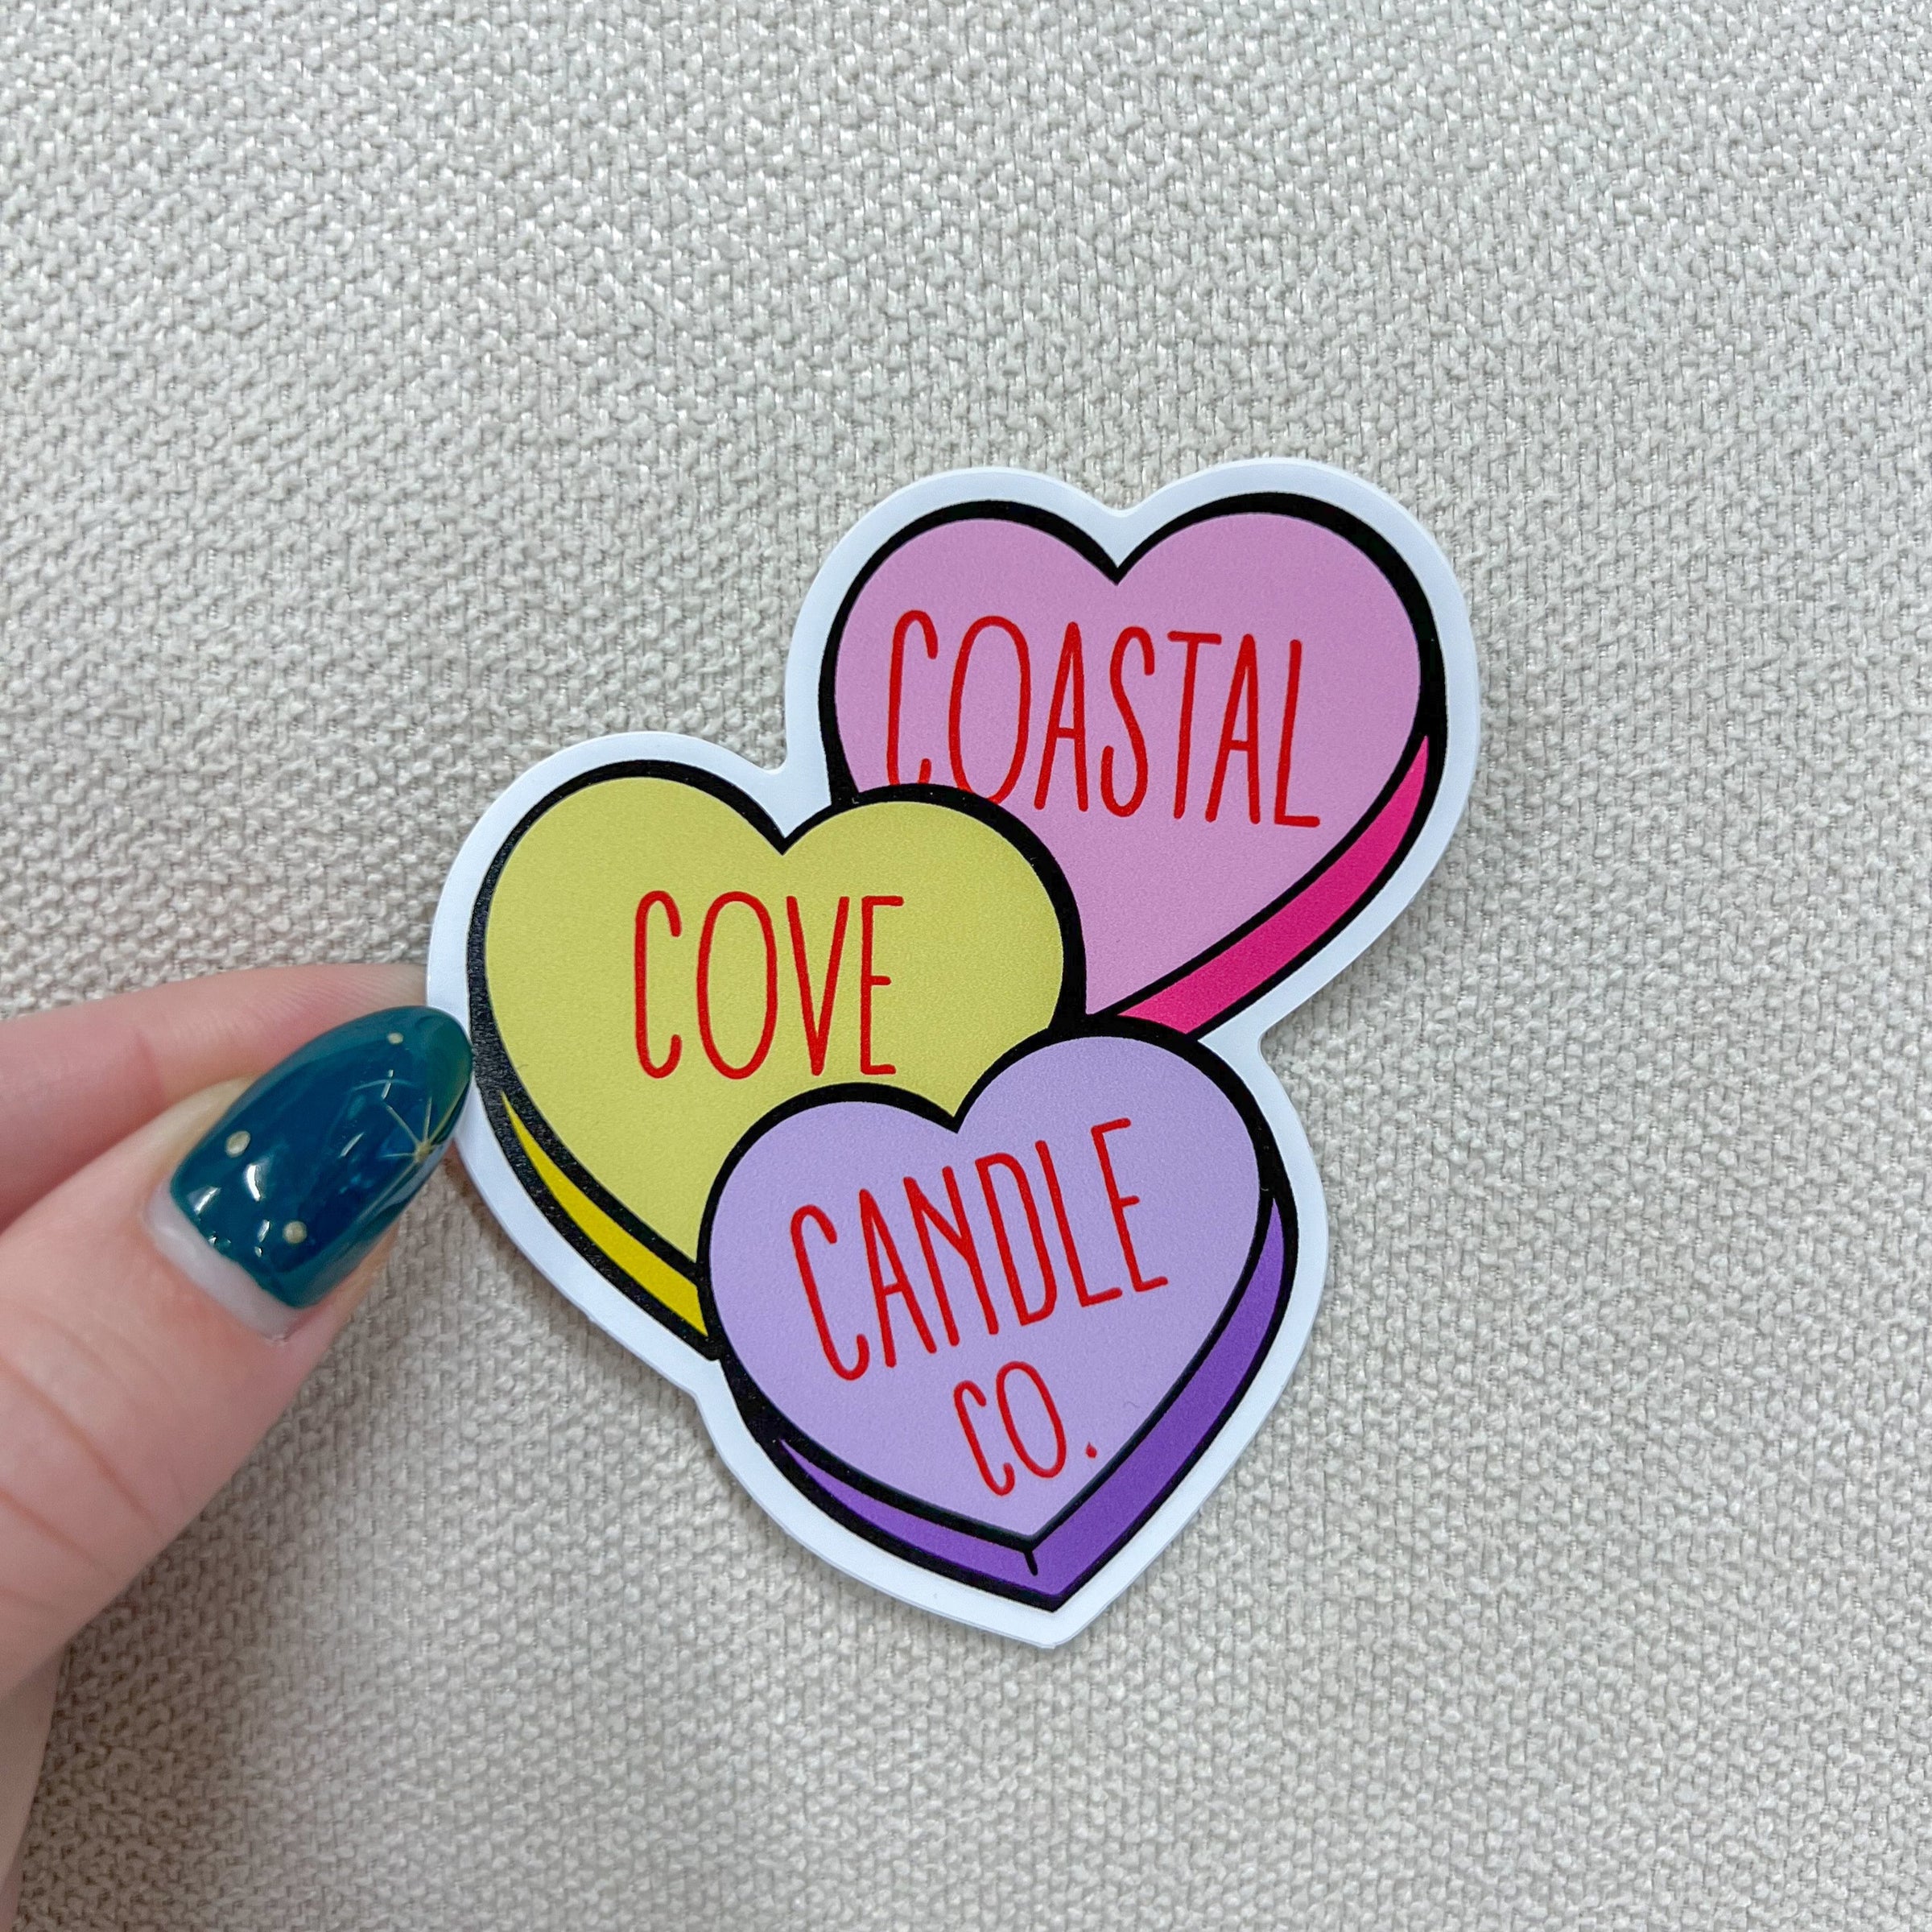 Coastal Cove Candle Co. Pink/Yellow/Purple Sweethearts Sticker